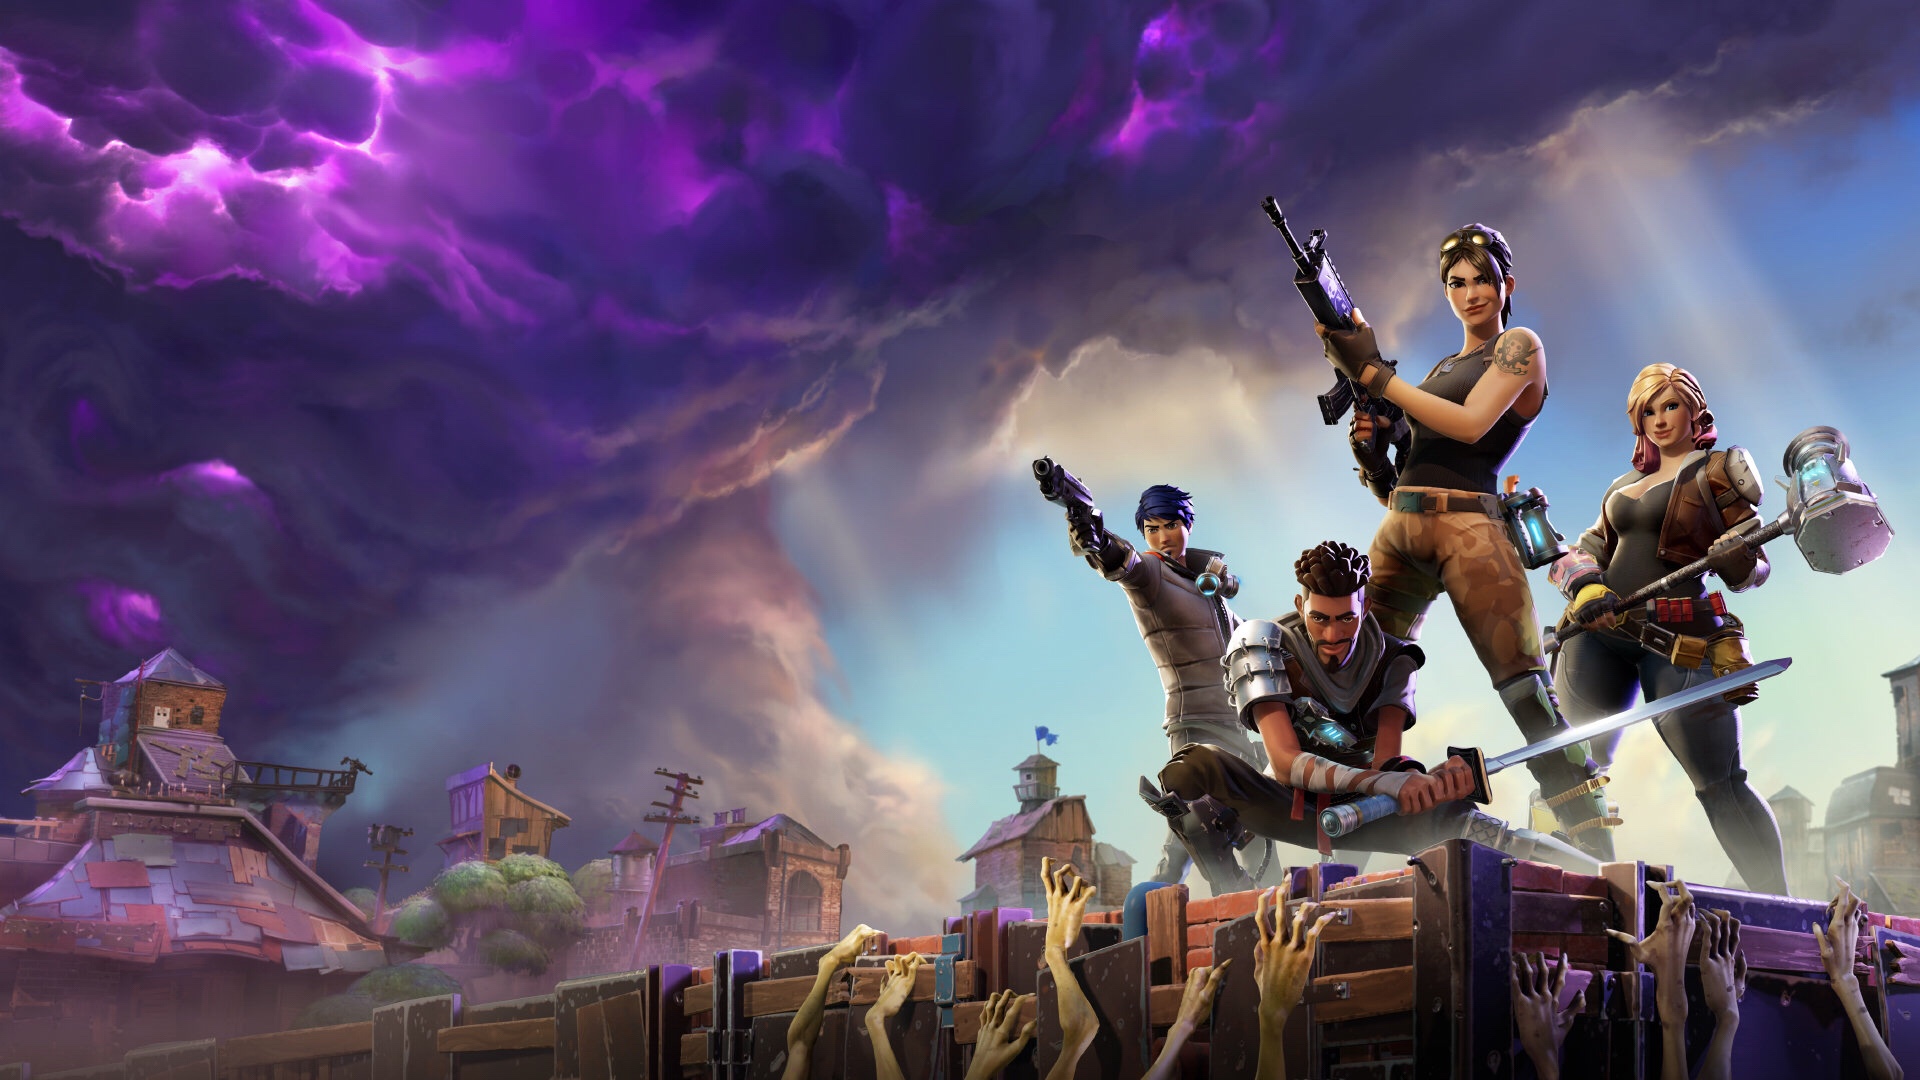 Microsoft says Fornite PS4 vs. Xbox One cross-play could potentially happen